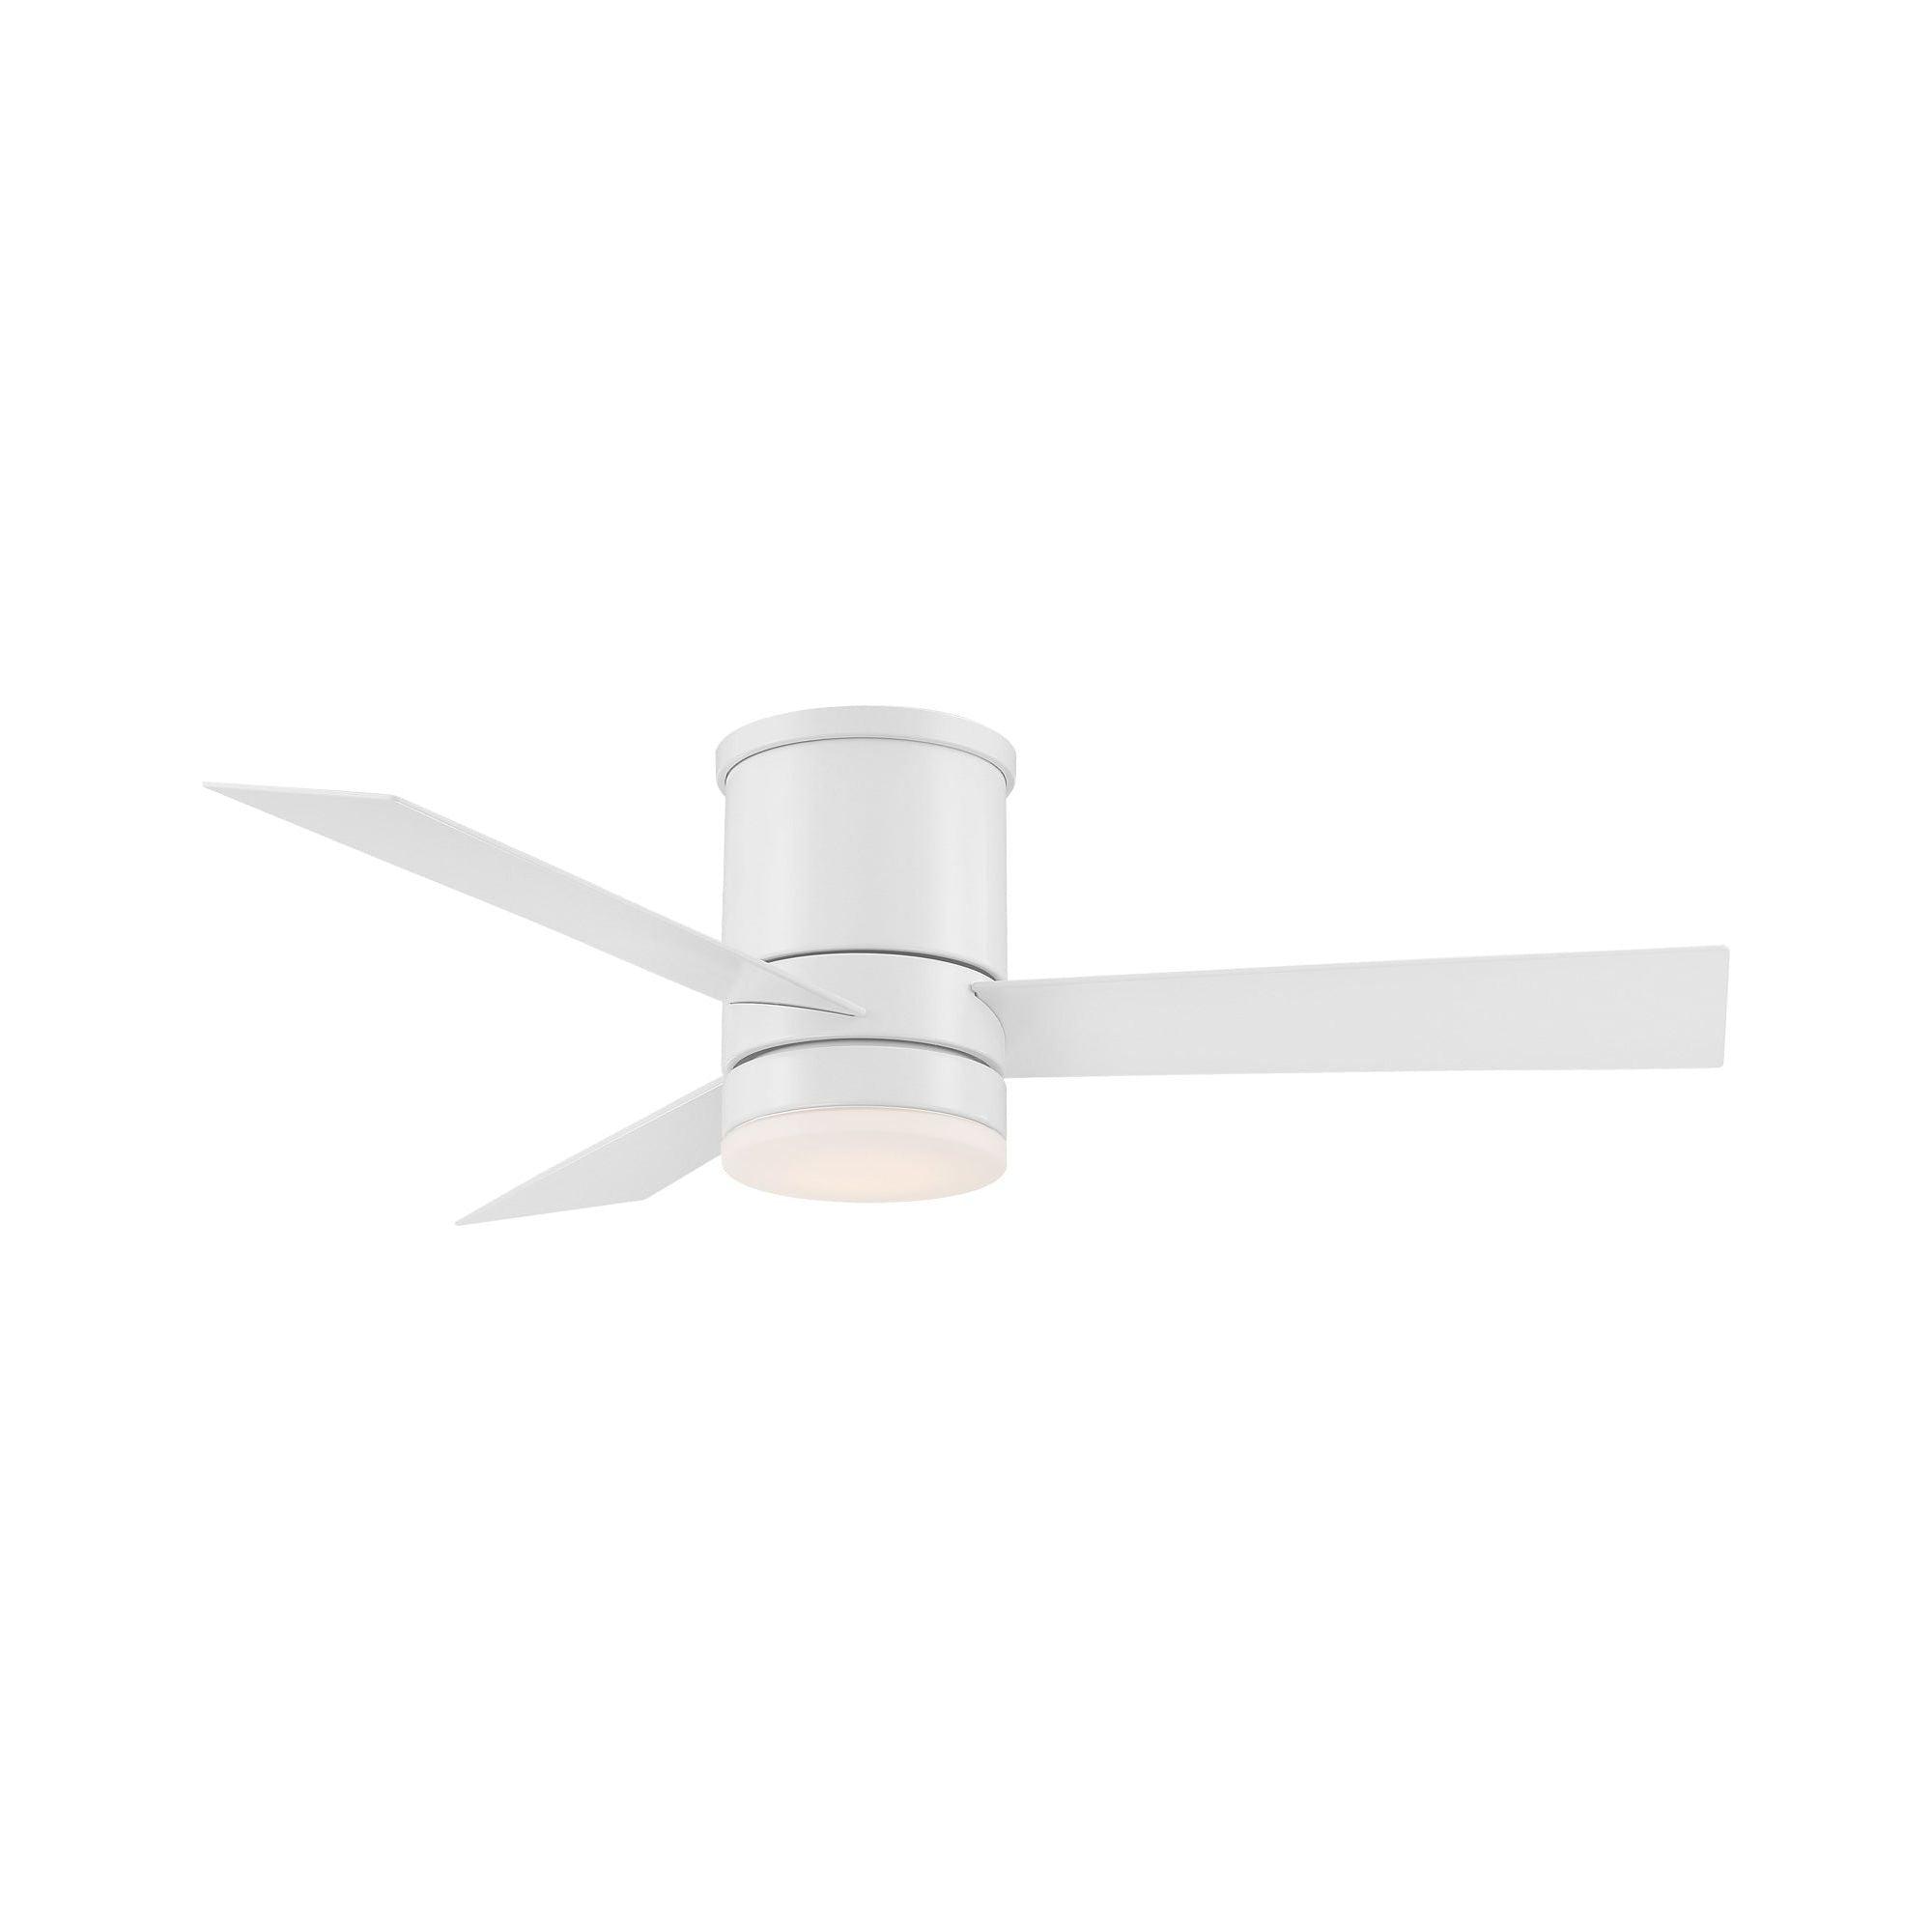 Modern Forms - Axis Indoor/Outdoor 3-Blade 44" Smart Flush Mount Ceiling Fan with LED Light Kit and Remote Control - Lights Canada